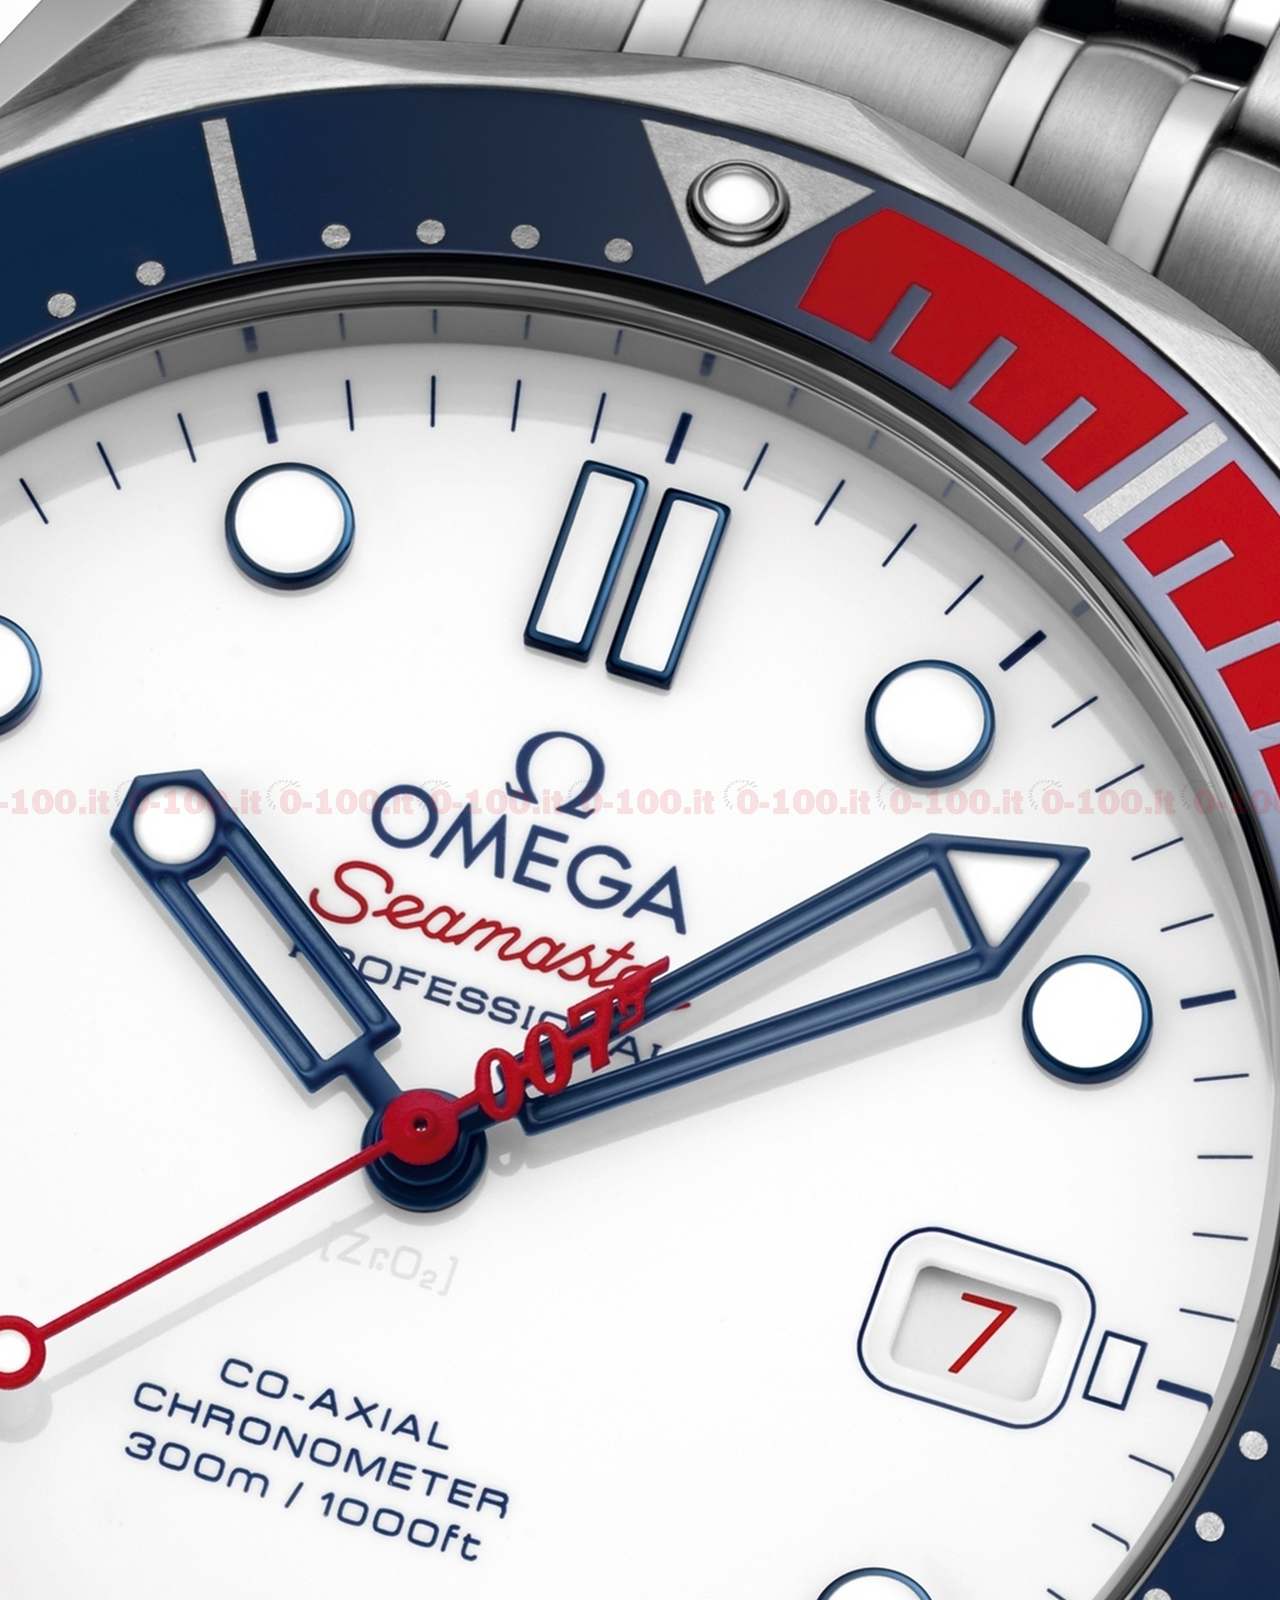 Omega Seamaster Diver 300M “Commander’s Watch” Limited Edition_0-1005